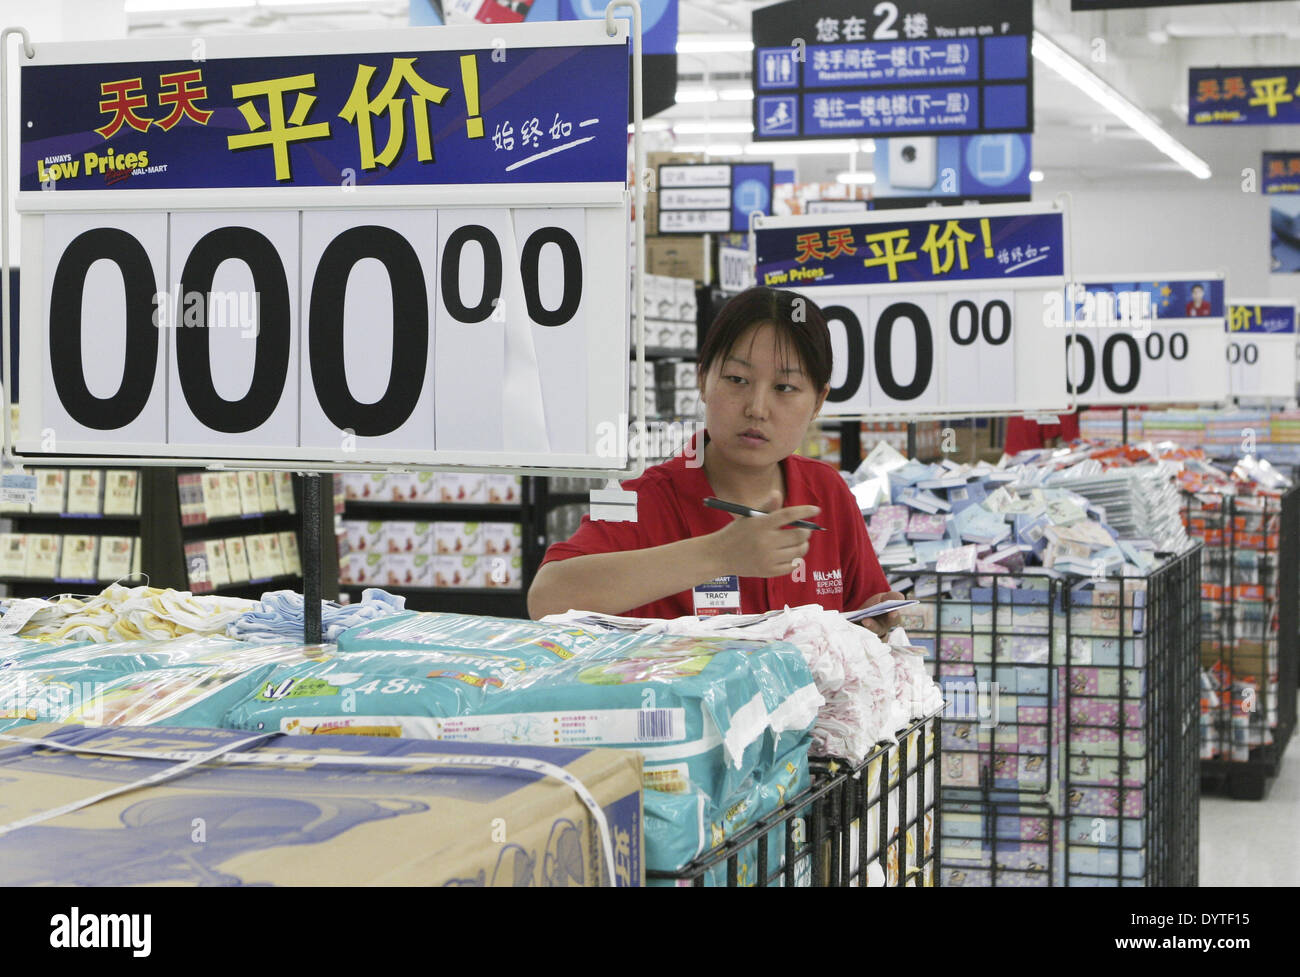 A Chinese worker prepares for the official opening of Wal Mart in Shanghai , China on 25 July 2005. The officical opening is Stock Photo